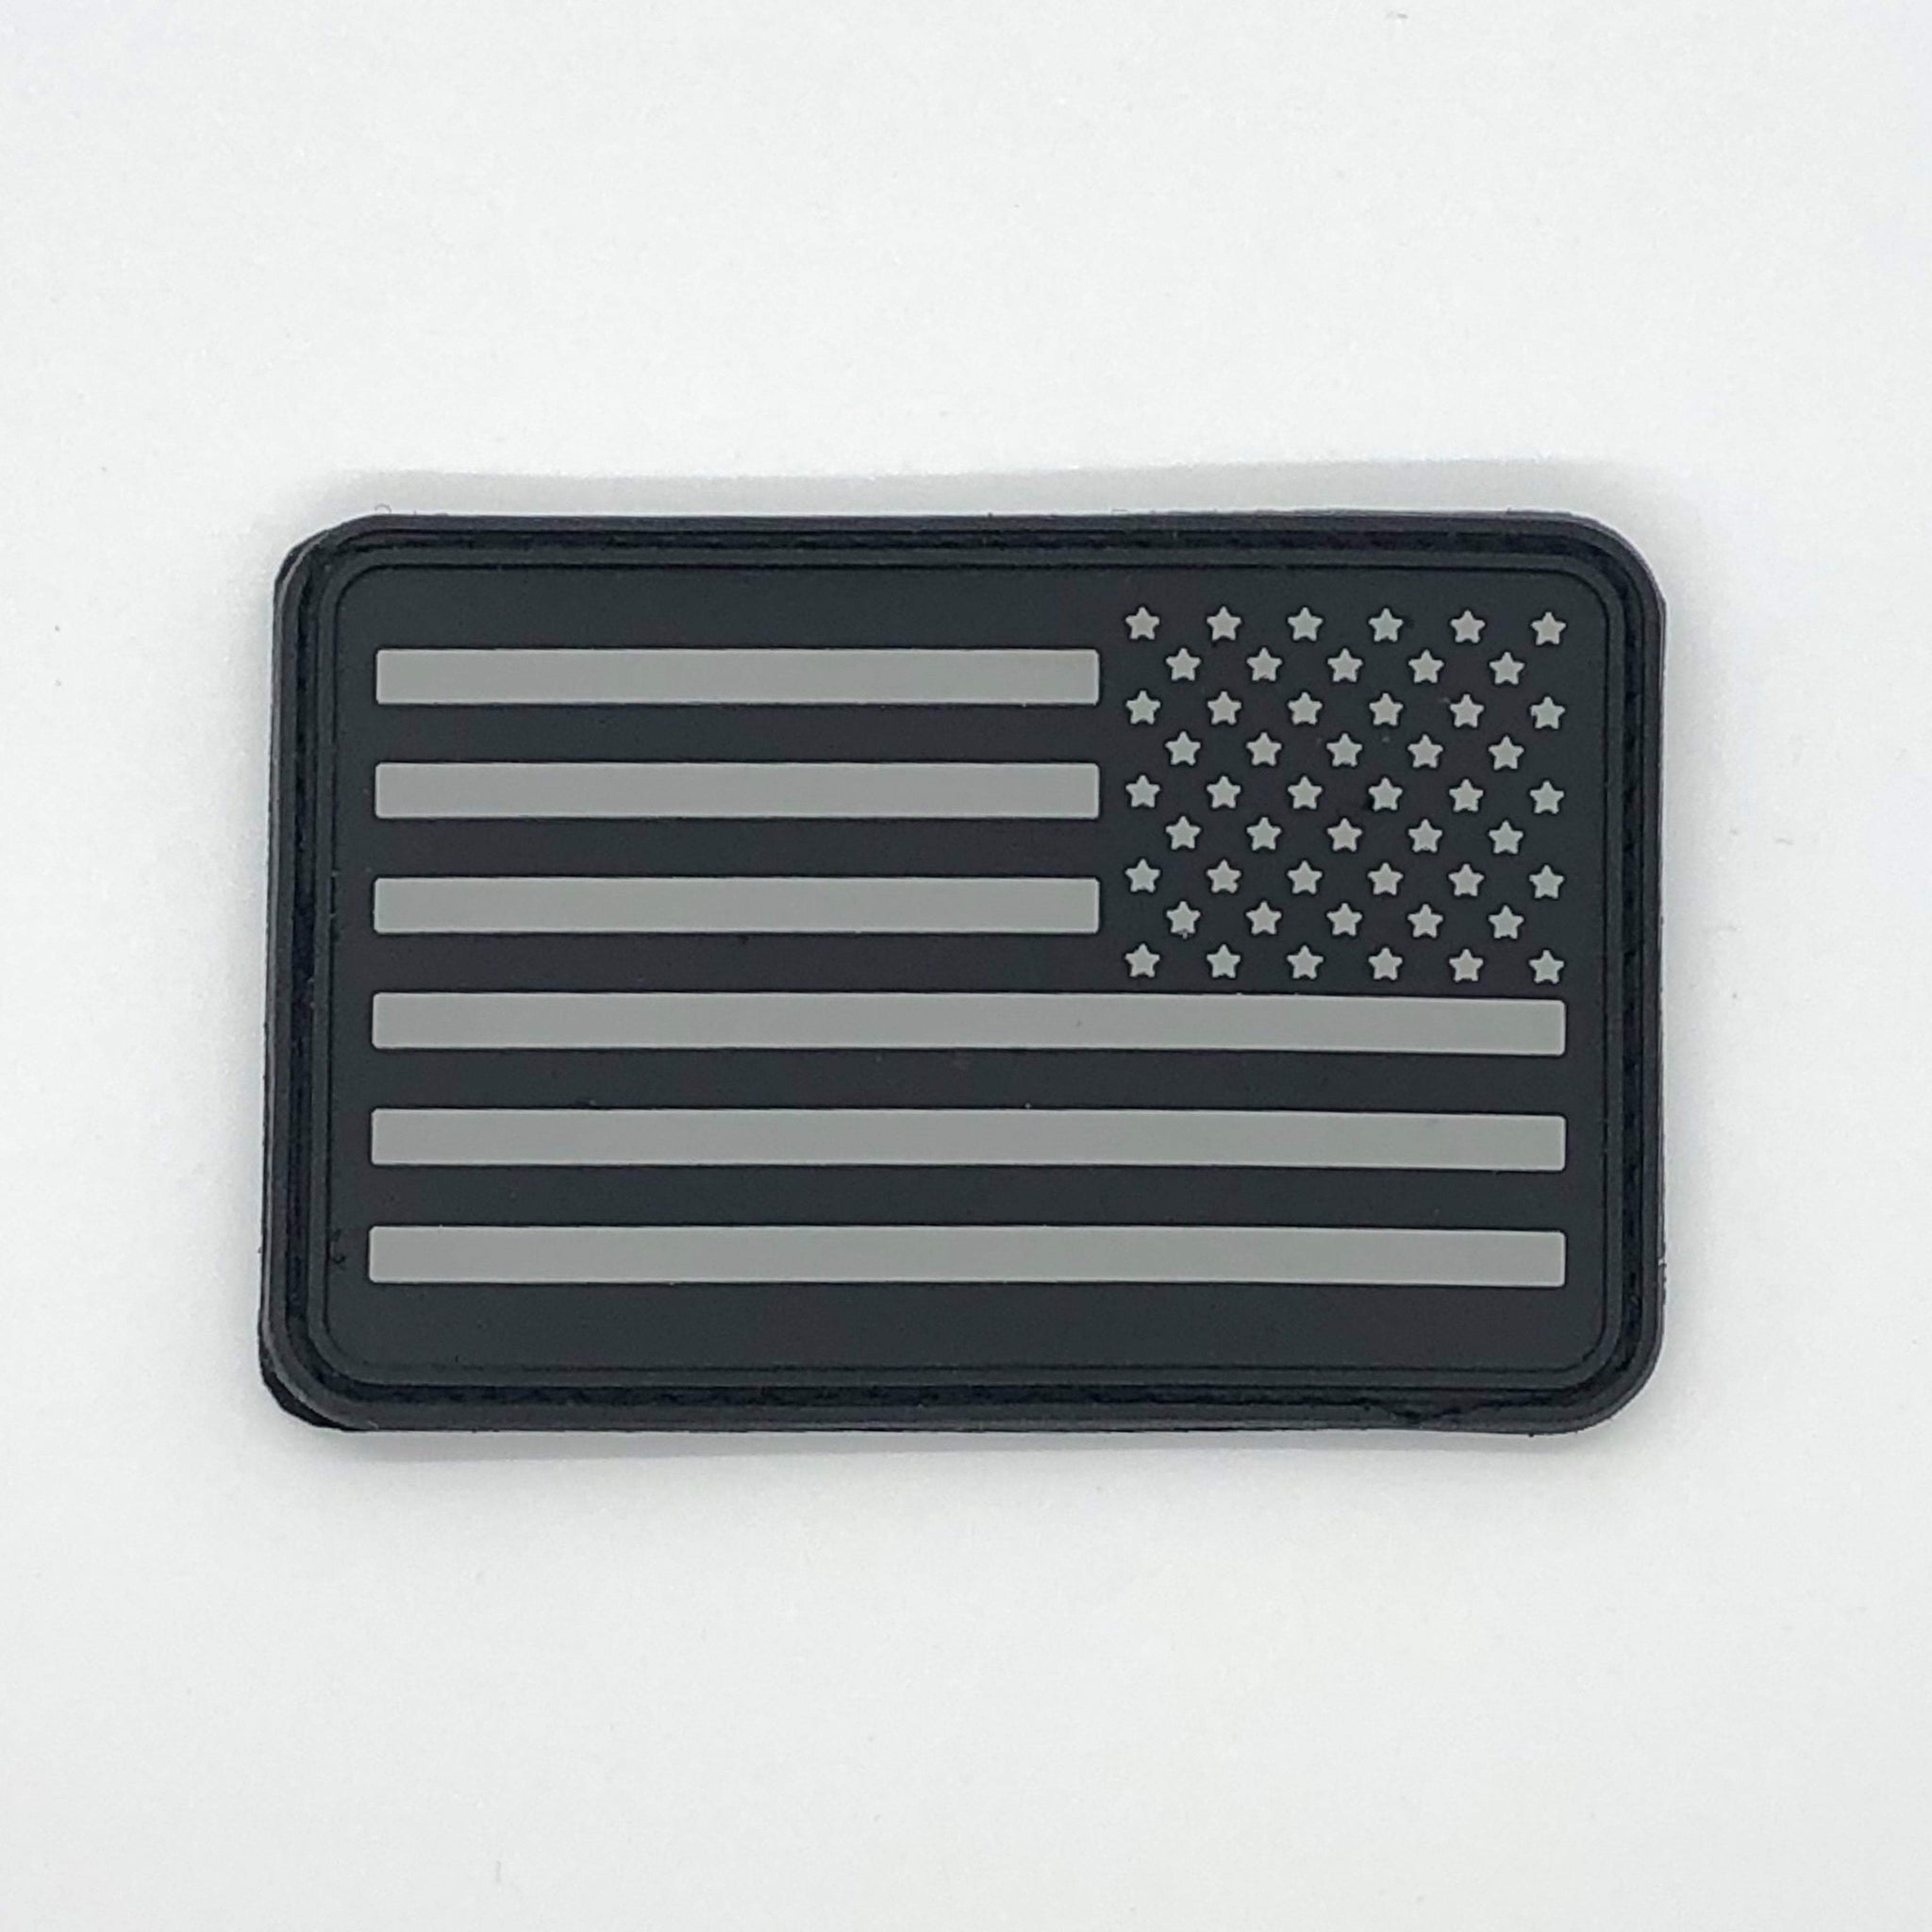 First Responder Patch - Stars & Stripes, The Flag Store